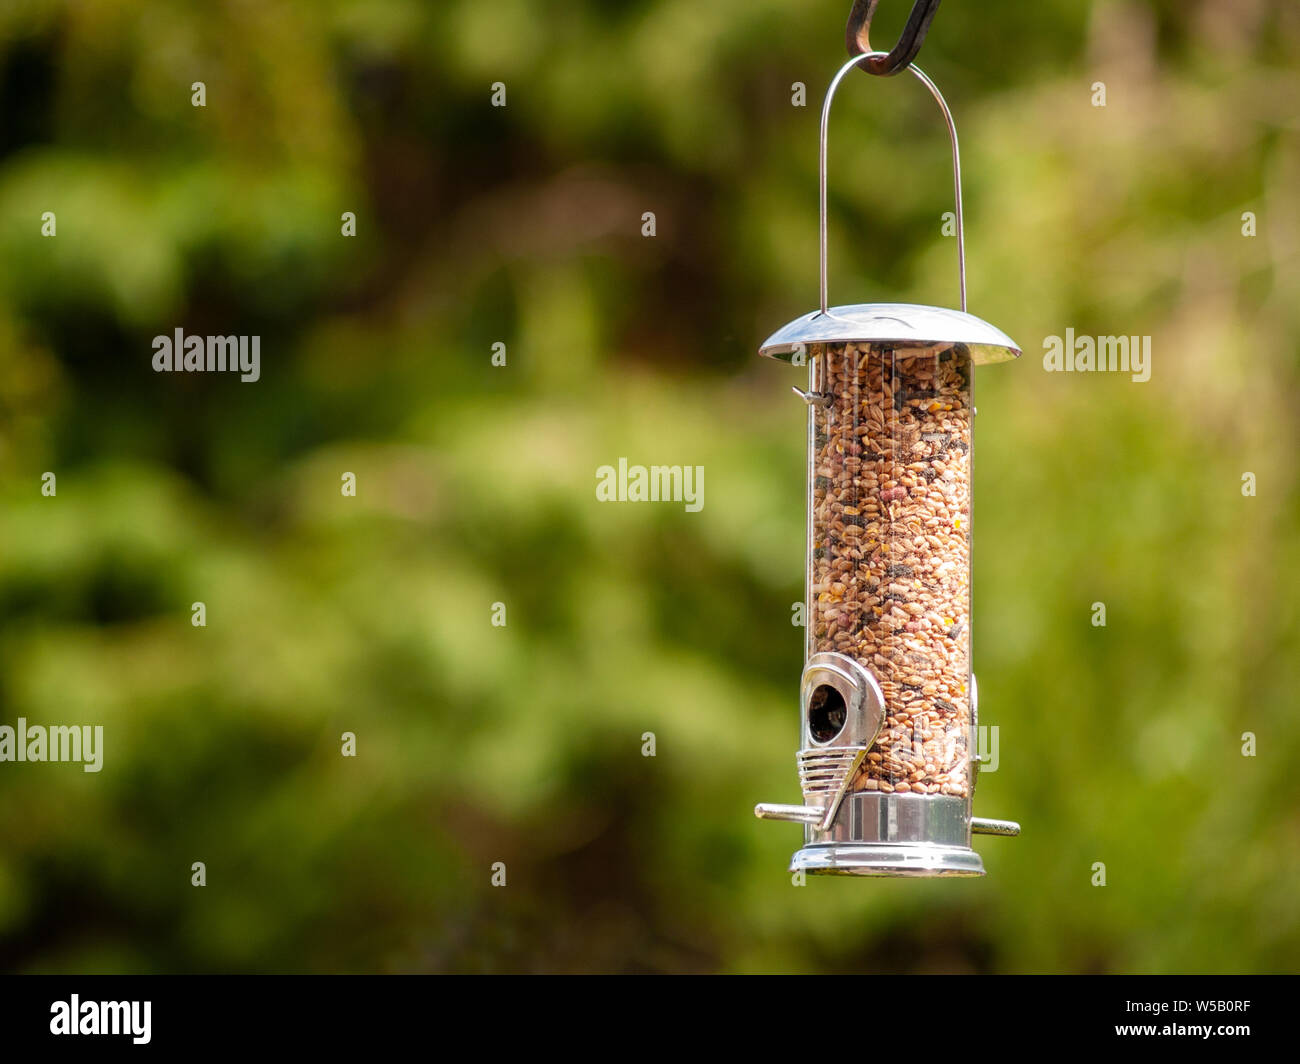 A bird feeder hanging from a hooked pole. The bird feeder is full of bird food and seed. Stock Photo